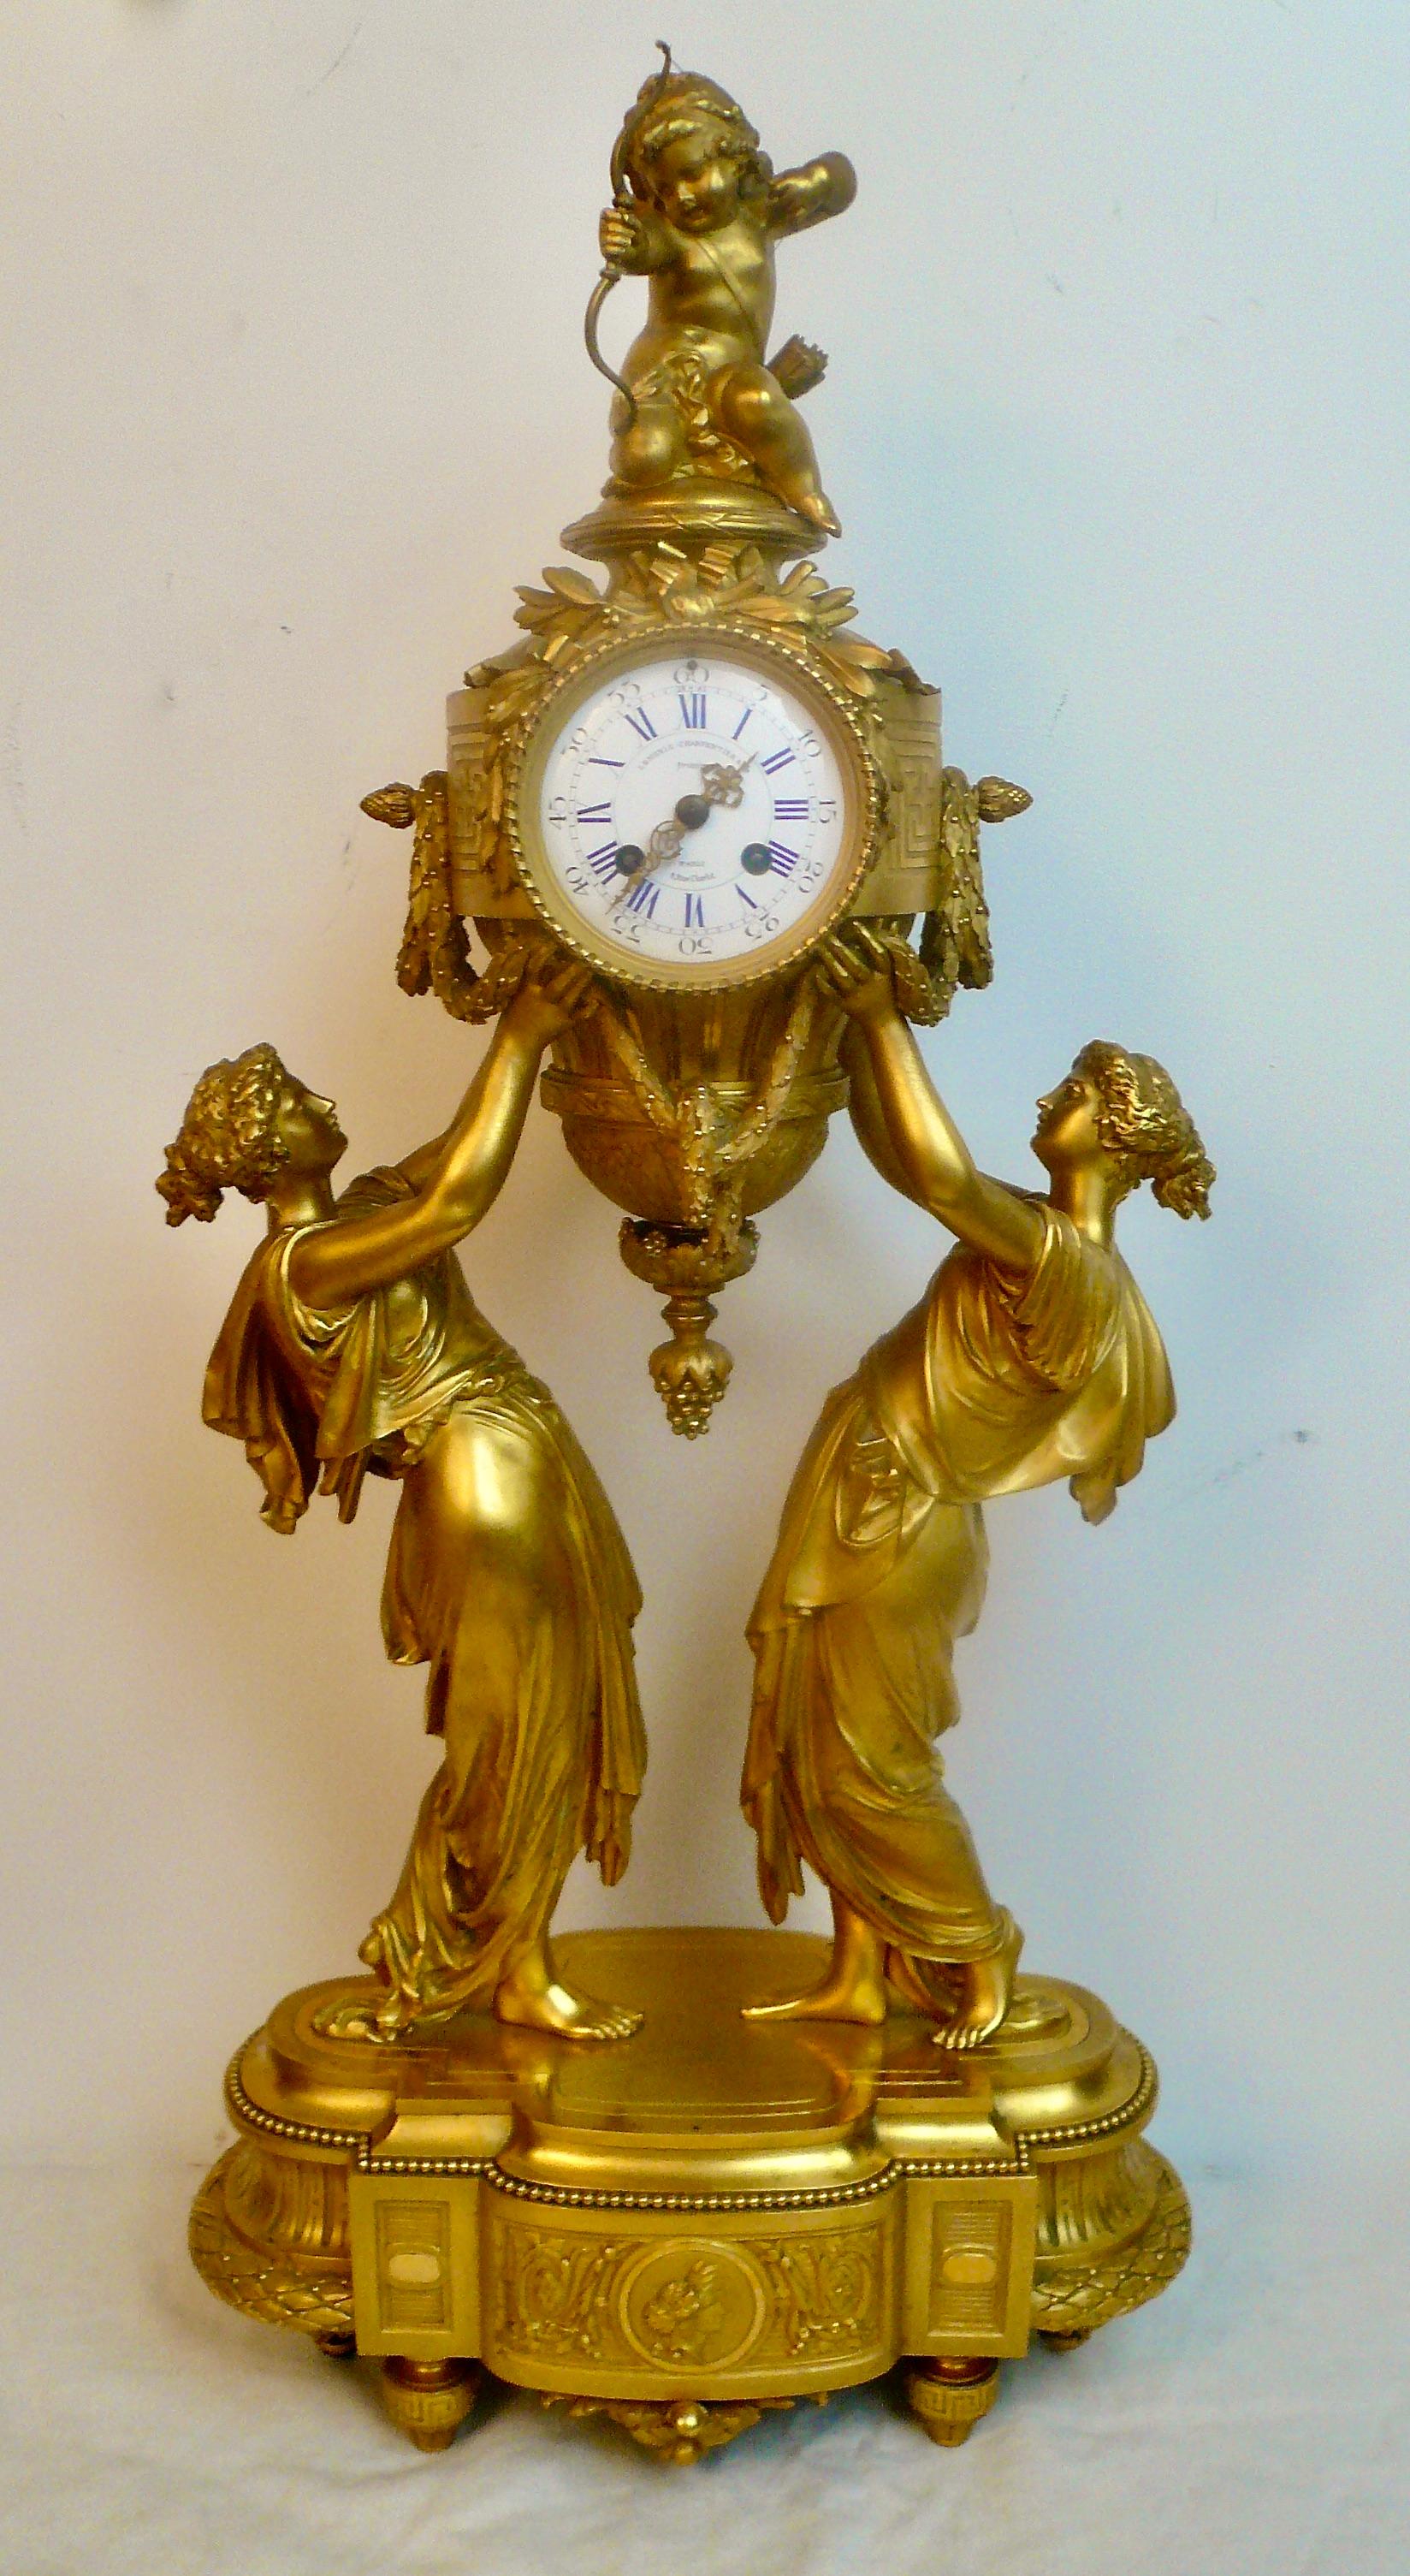 This large and impressive clock is by the renown French Bronzier Lemerle Charpentier & Cie.  It features Classical maidens holding a large urn form case surmounted by Cupid with his bow.  The case is decorated with Classical motifs including